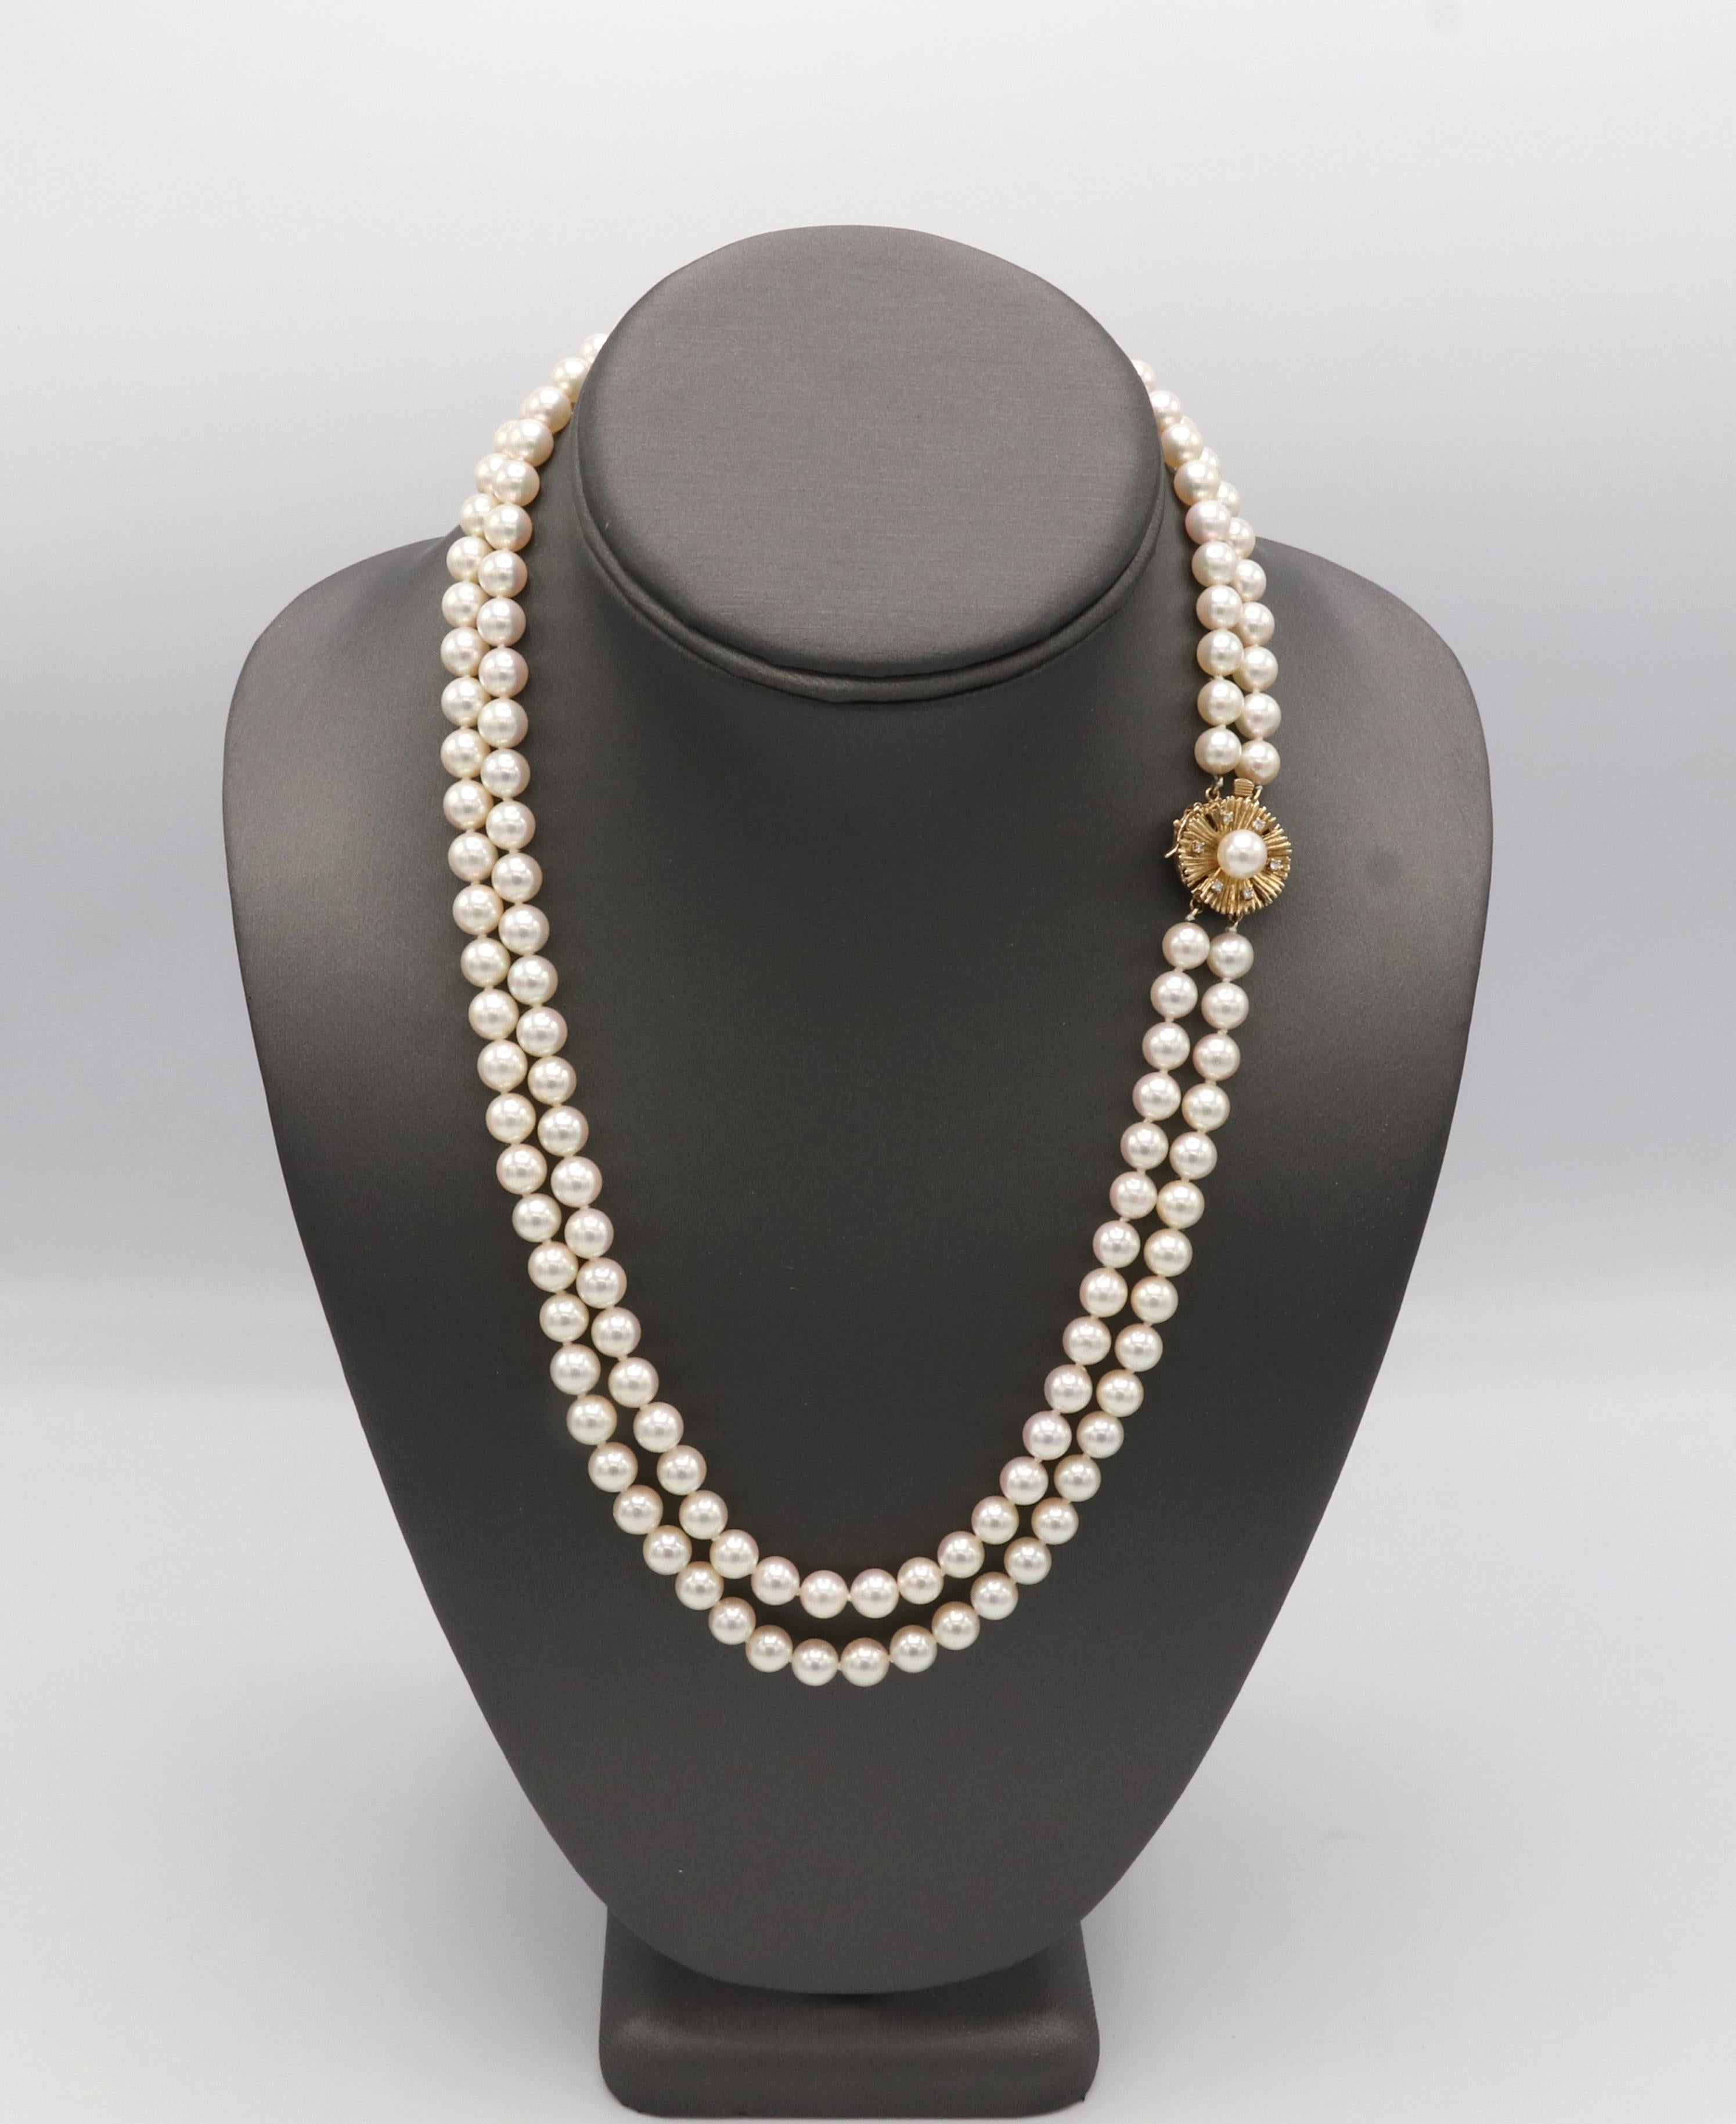 Double Strand 7mm Cultured Pearl Necklace With Natural Diamond & Gold Clasp 
Metal: 14k yellow gold
Weight: 64.3 grams
Pearls: 7mm, 2 rows, white with creamy luster
Diamonds: .06 CTW G-H VS round natural diamonds
Clasp: 17m
Length: 20 inch